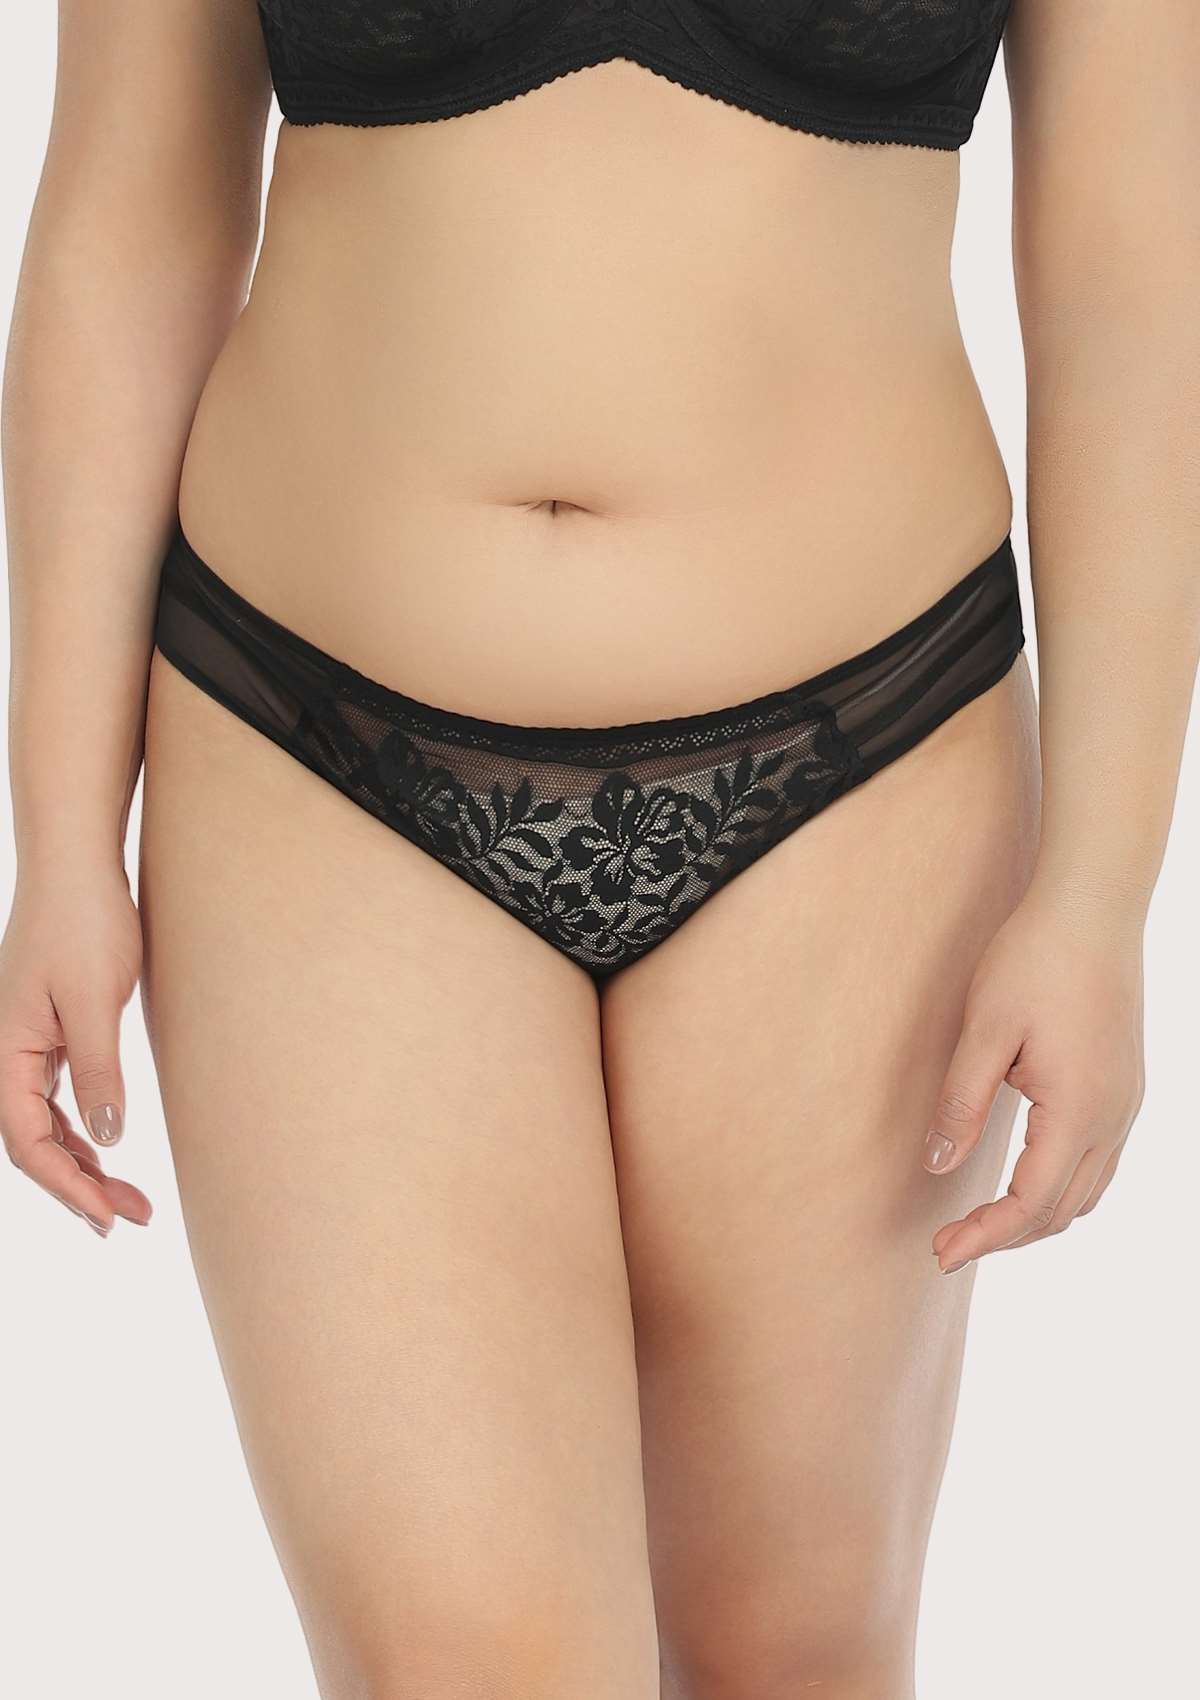 HSIA Mid-Rise Sexy Lace-Trimmed Delicate Breathable Underwear Panty